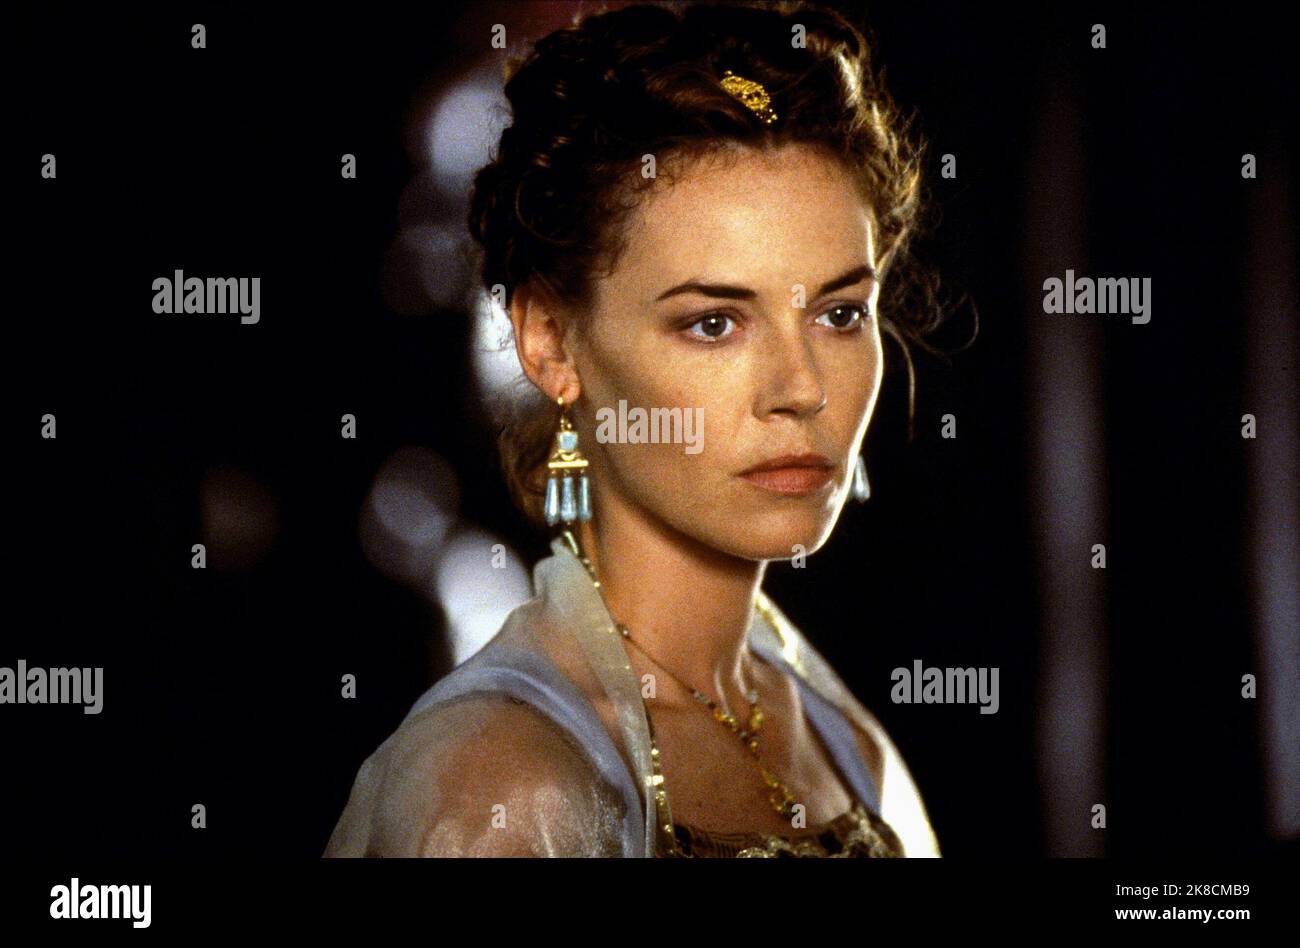 Connie Nielsen Film: Gladiator (USA/UK 2000) Characters: Lucilla ...